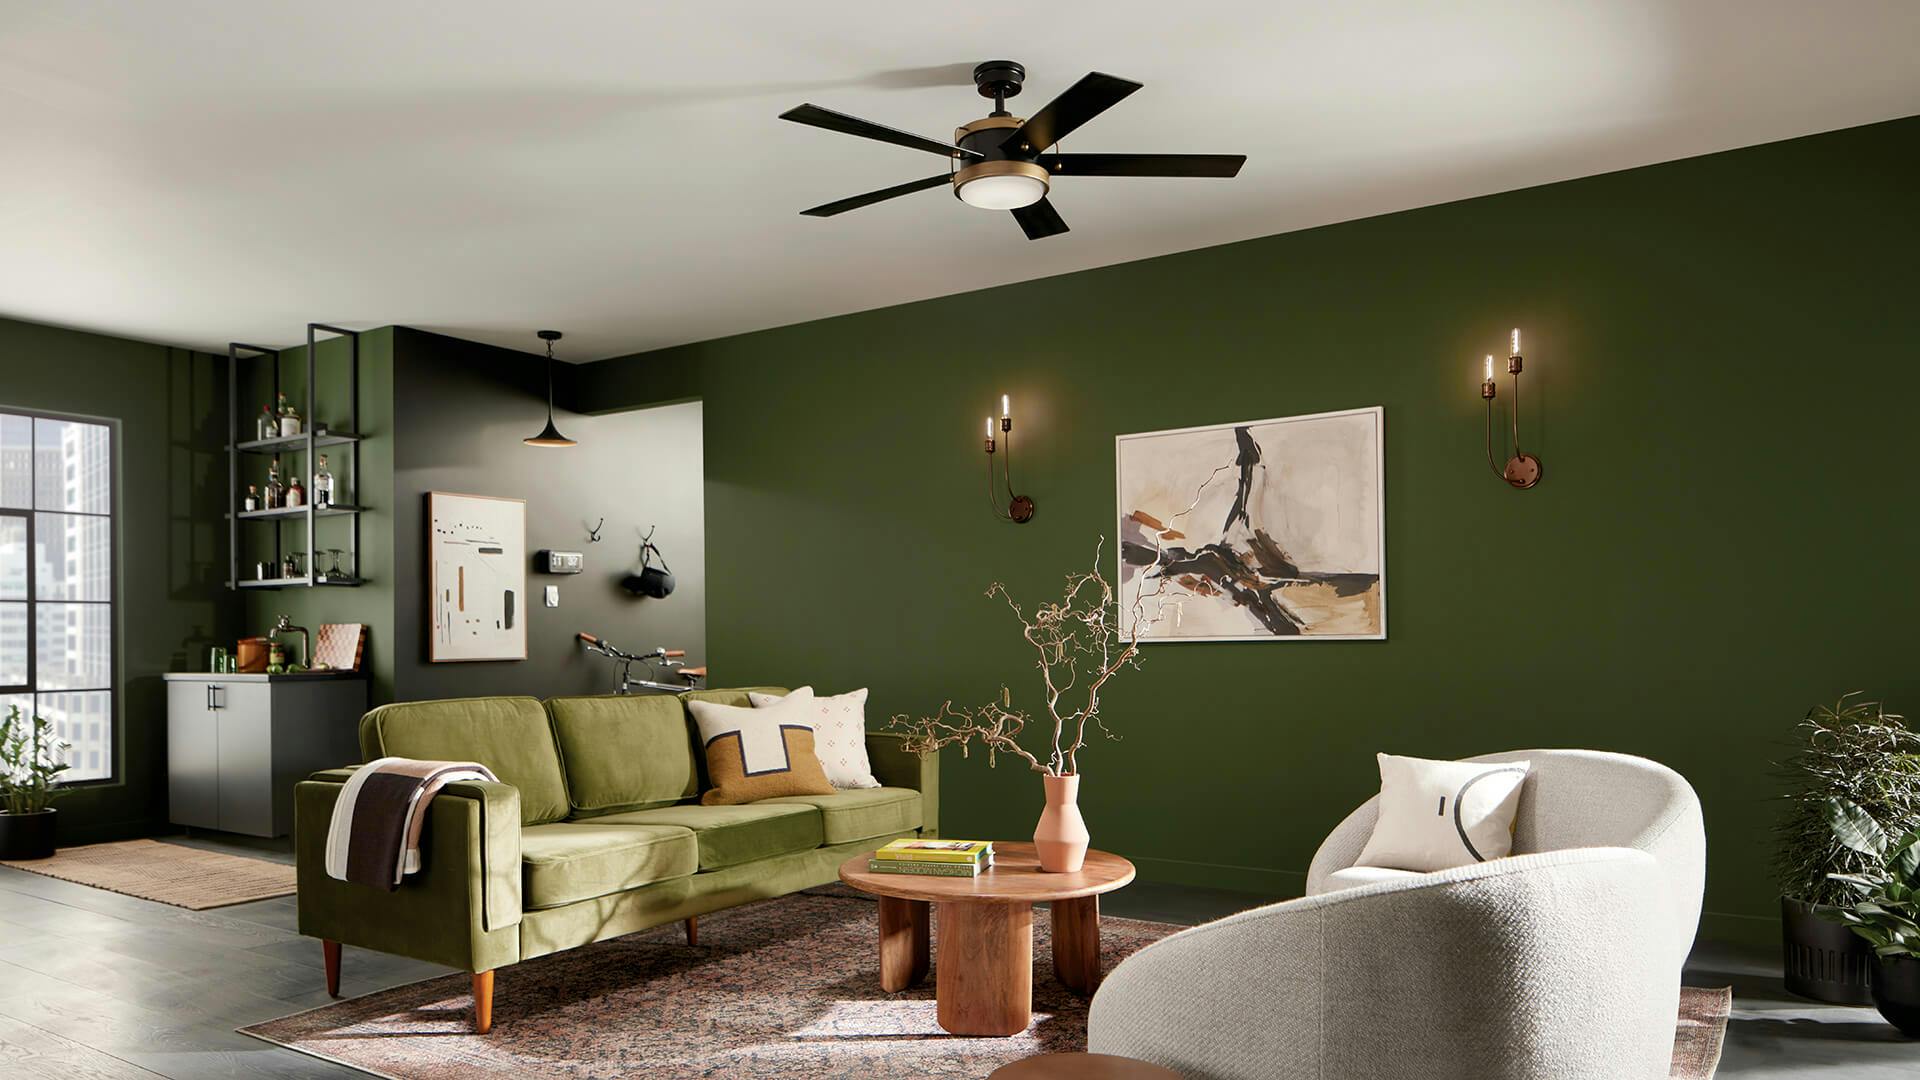 Living room at daytime featuring gold Hatton sconces lit against a deep green wall with a black and gold Salvo ceiling fan hanging above